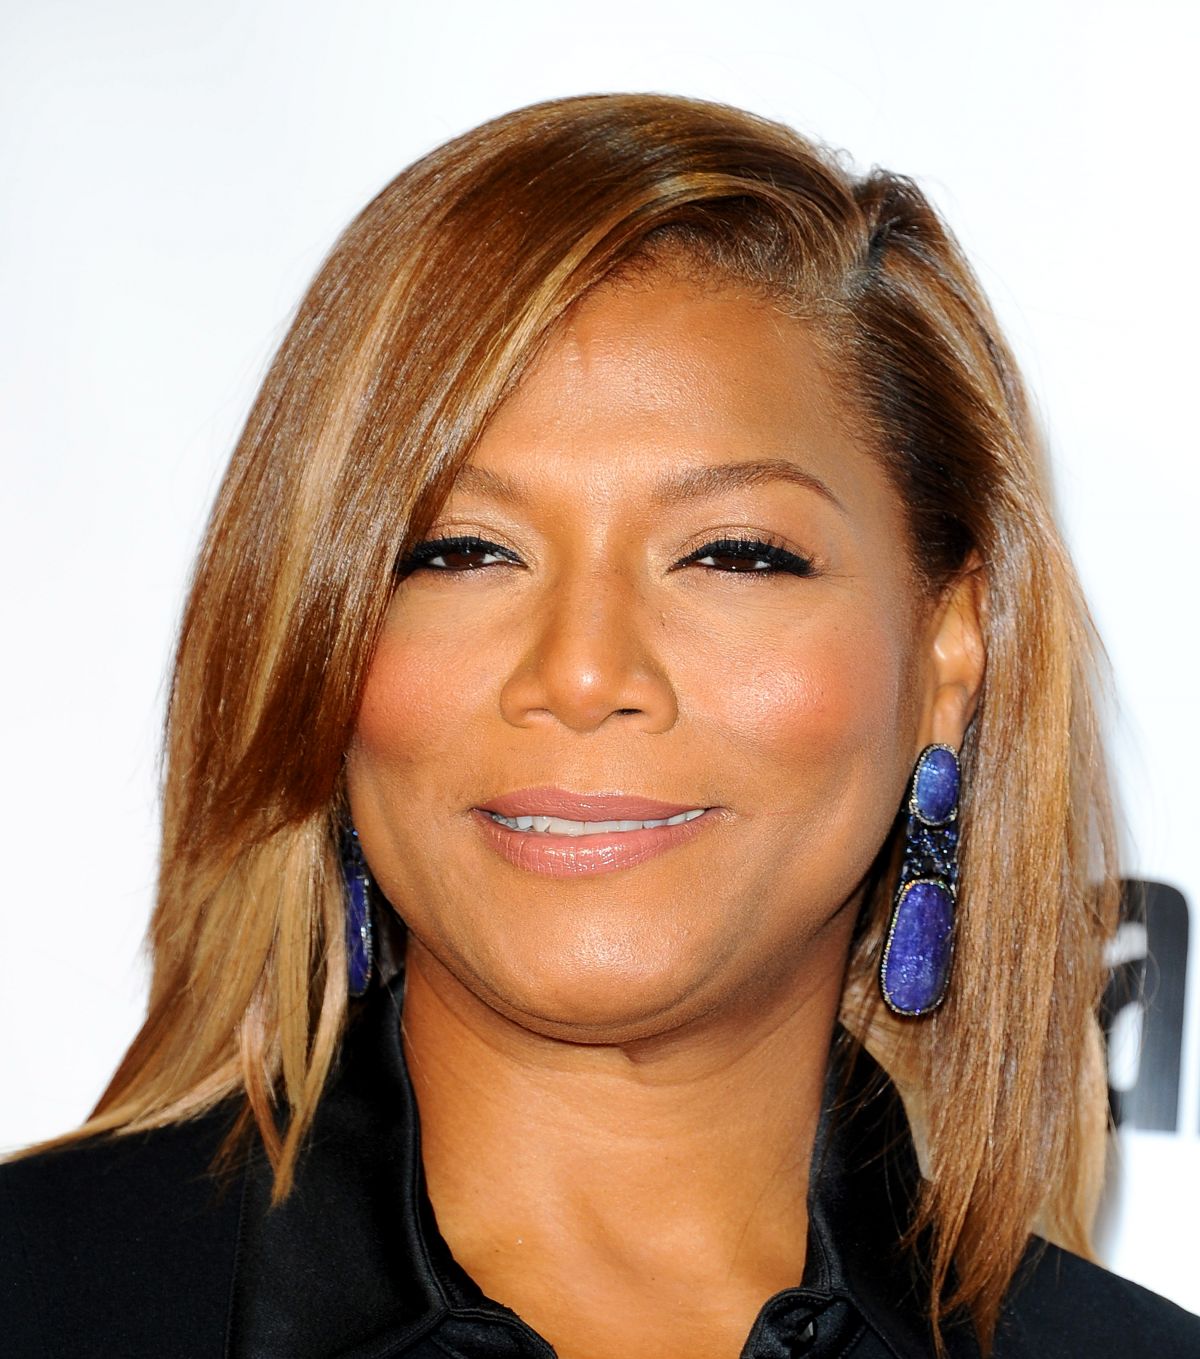 QUEEN LATIFAH at VH1 Big in 2015 With Entertainment Weekly Awards in ...